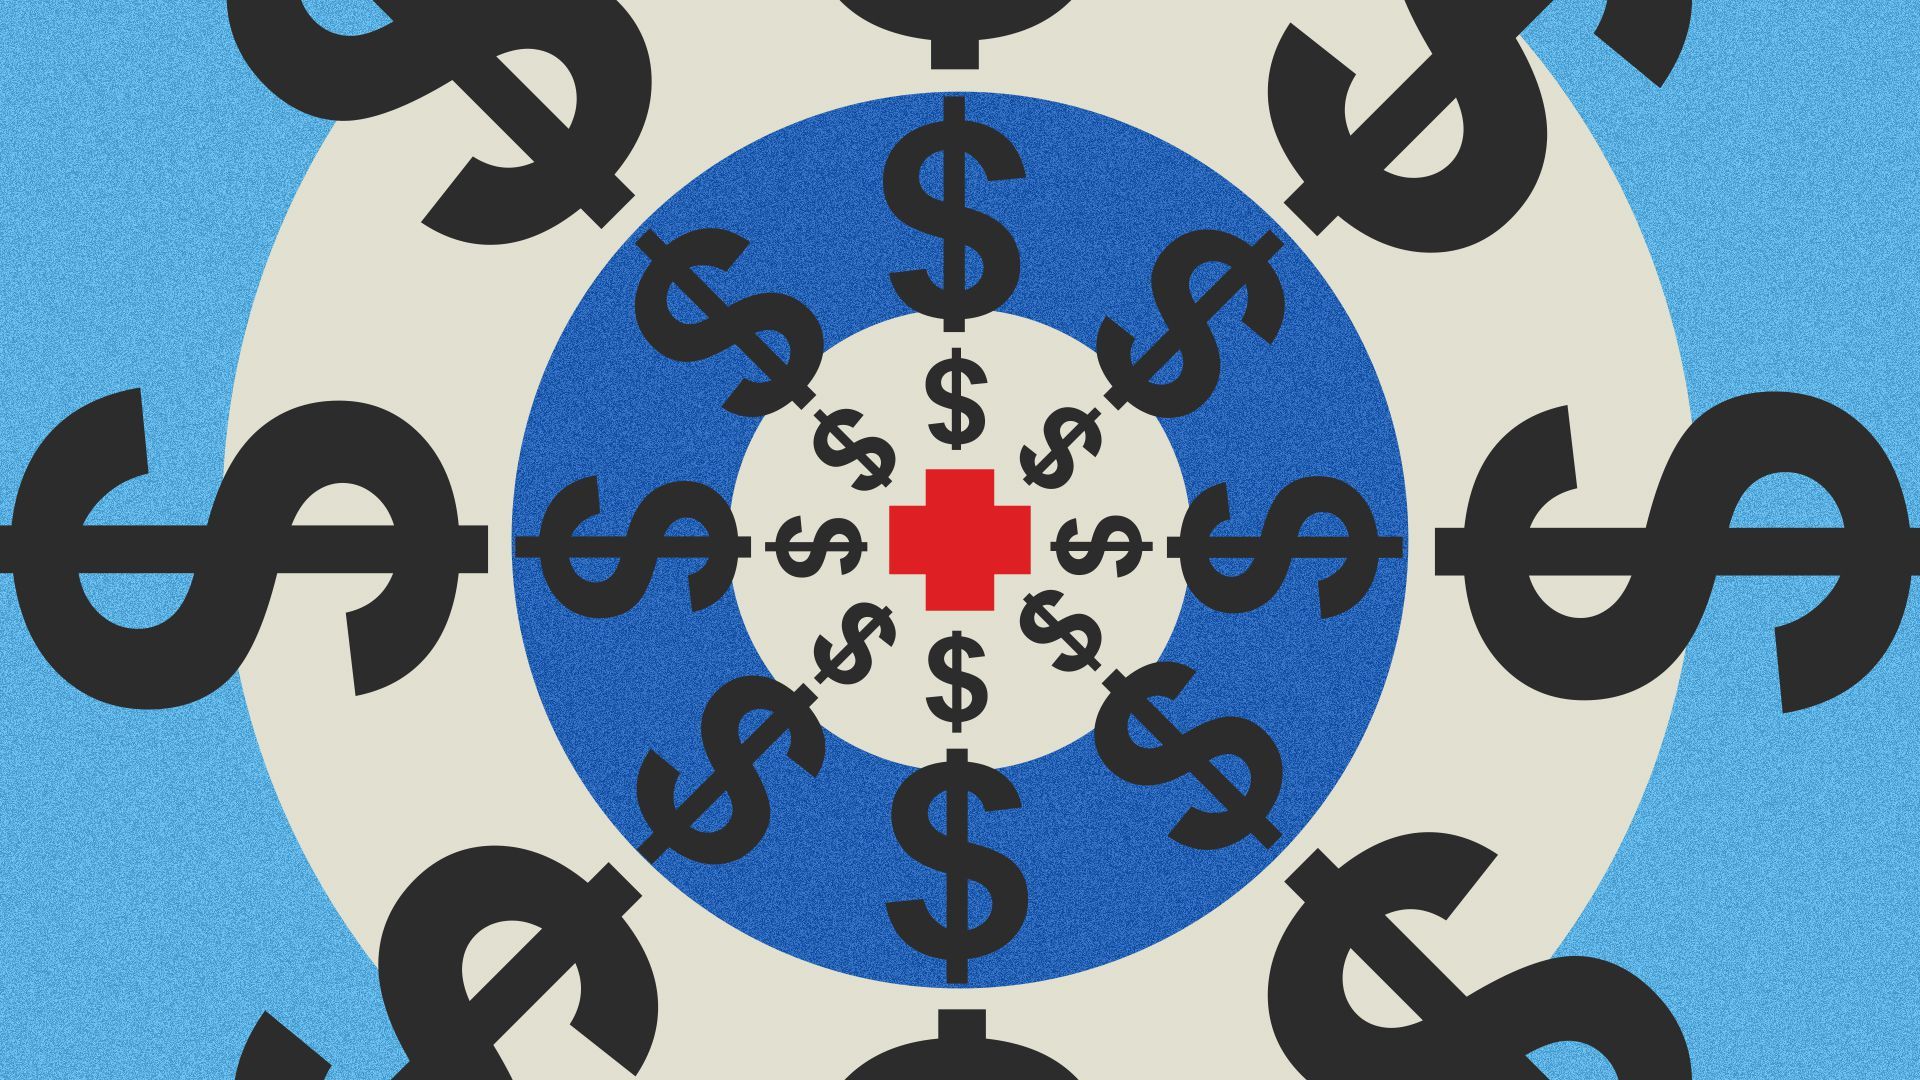 Illustration of red cross surrounded by concentric circles of dollar symbols.